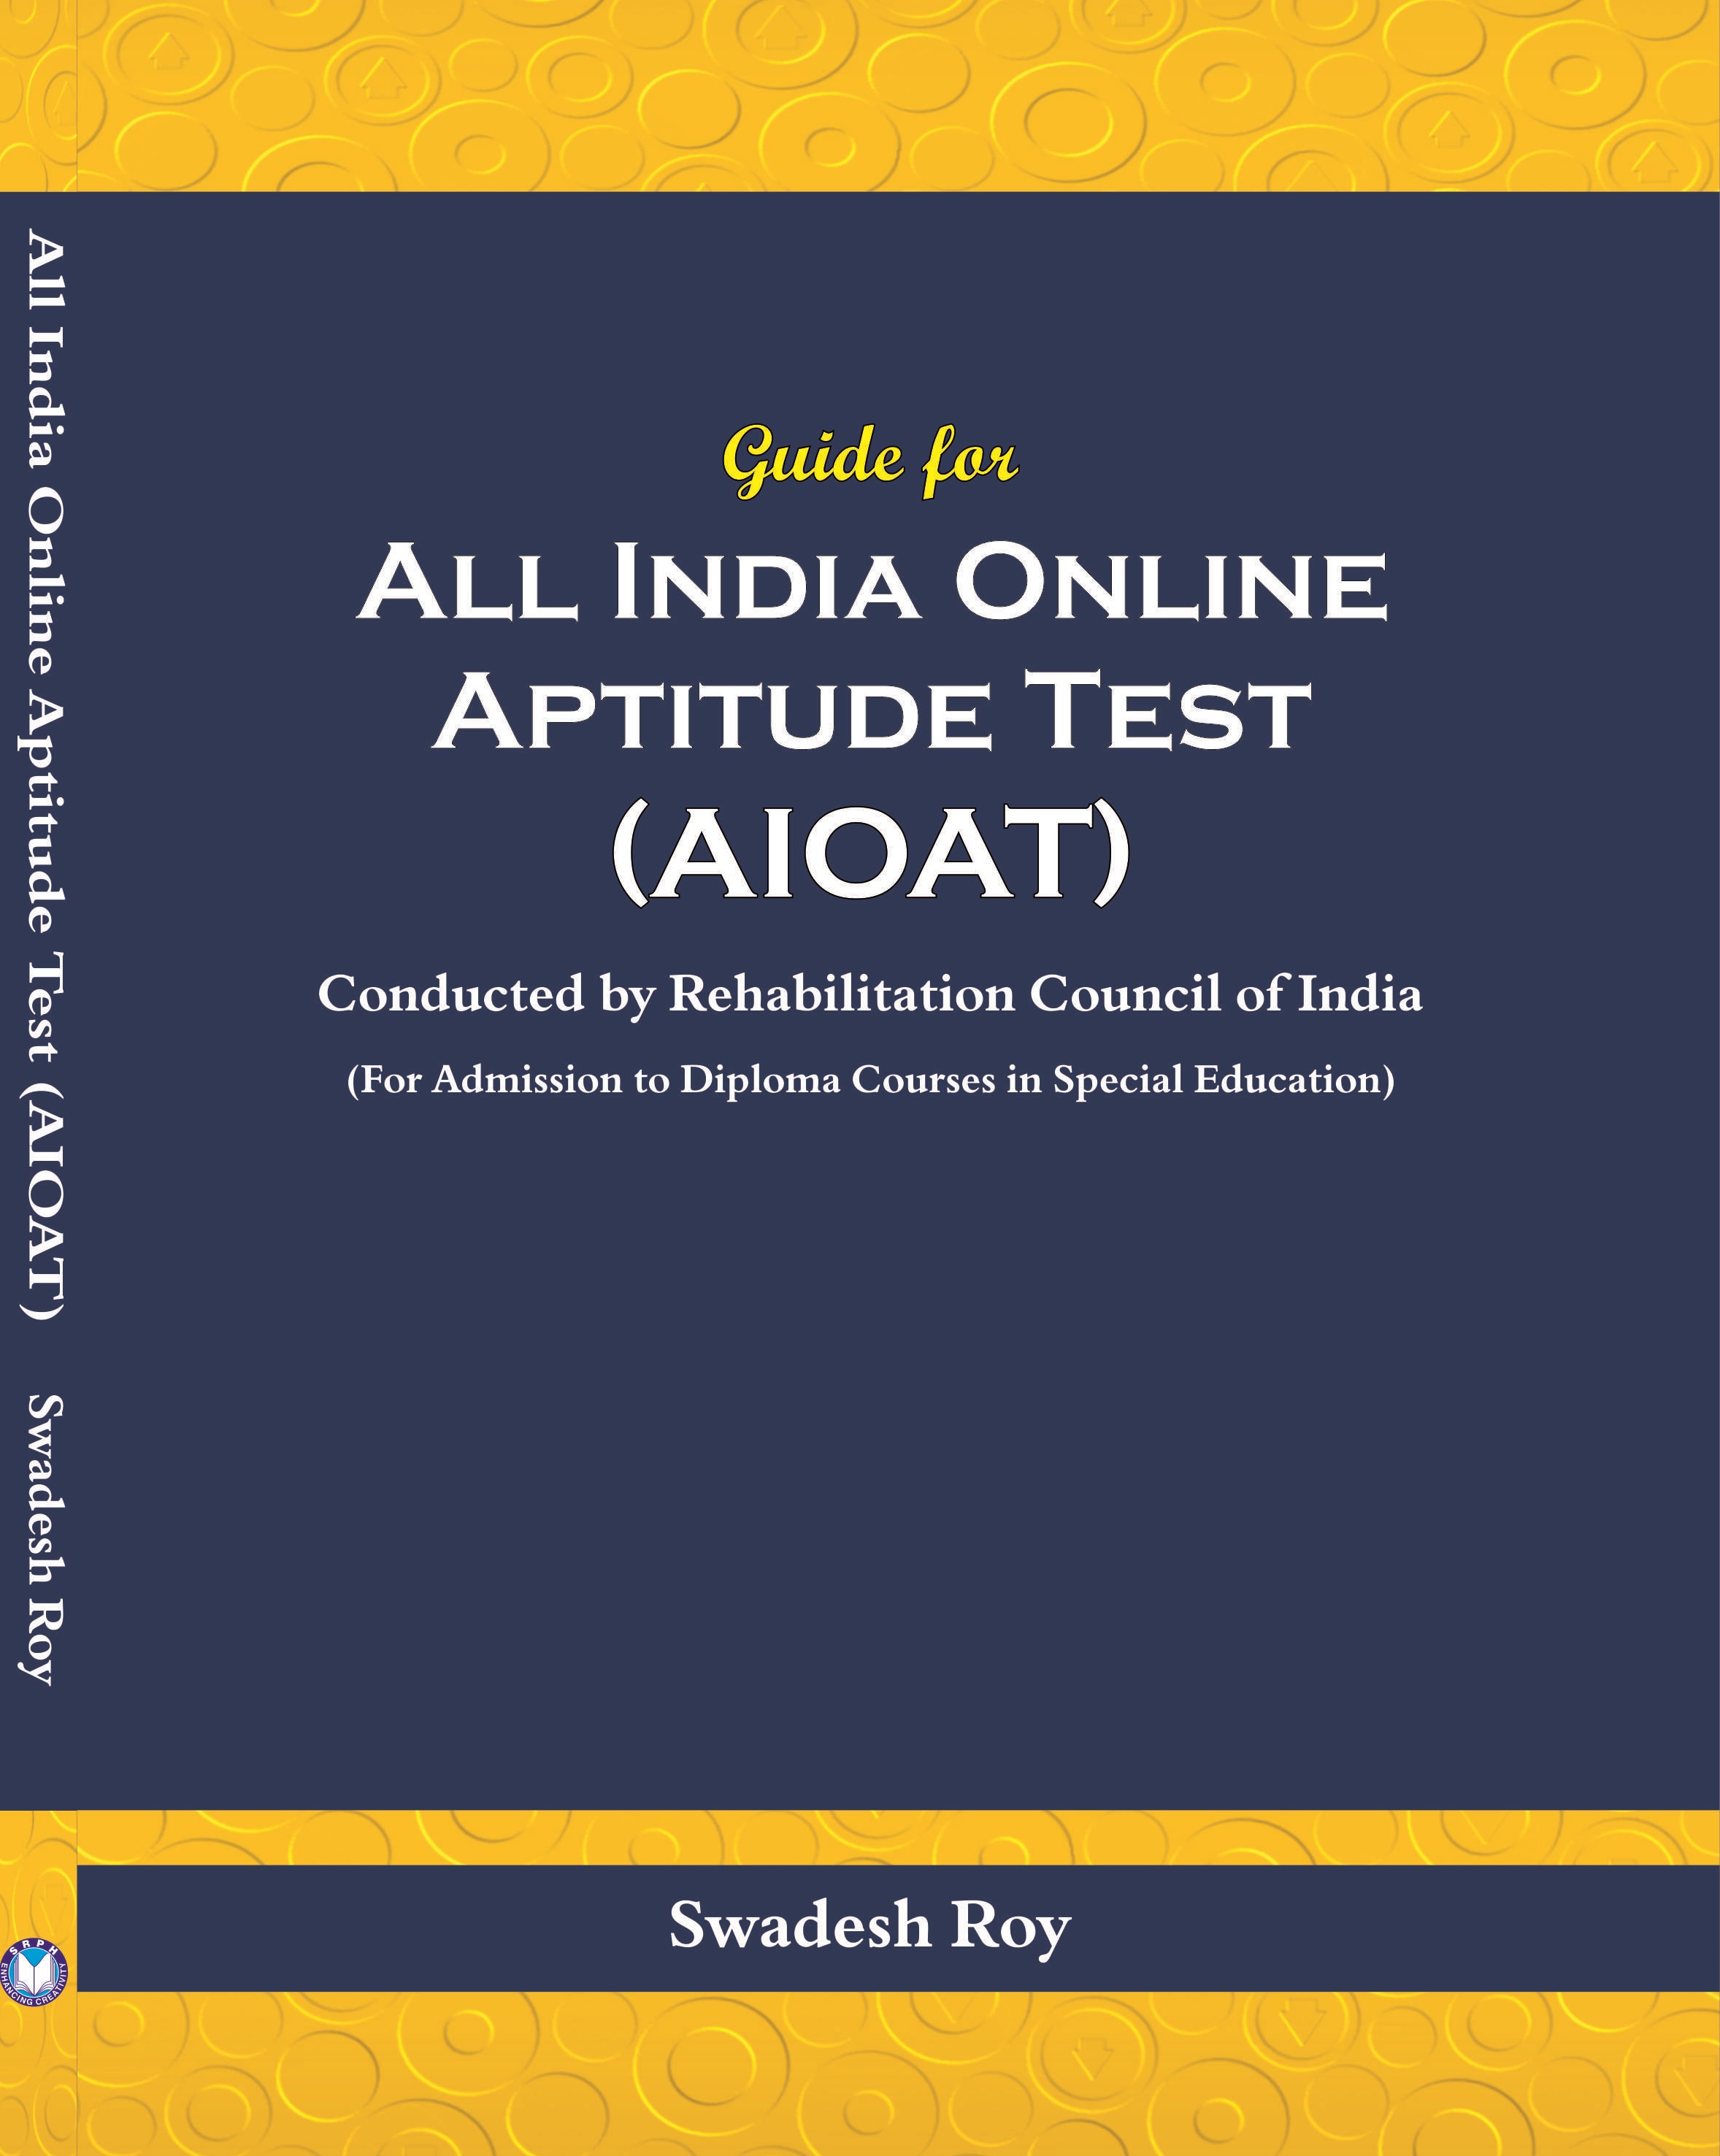 buy-guide-for-all-india-online-aptitude-test-aioat-conducted-by-rehabilitation-online-299